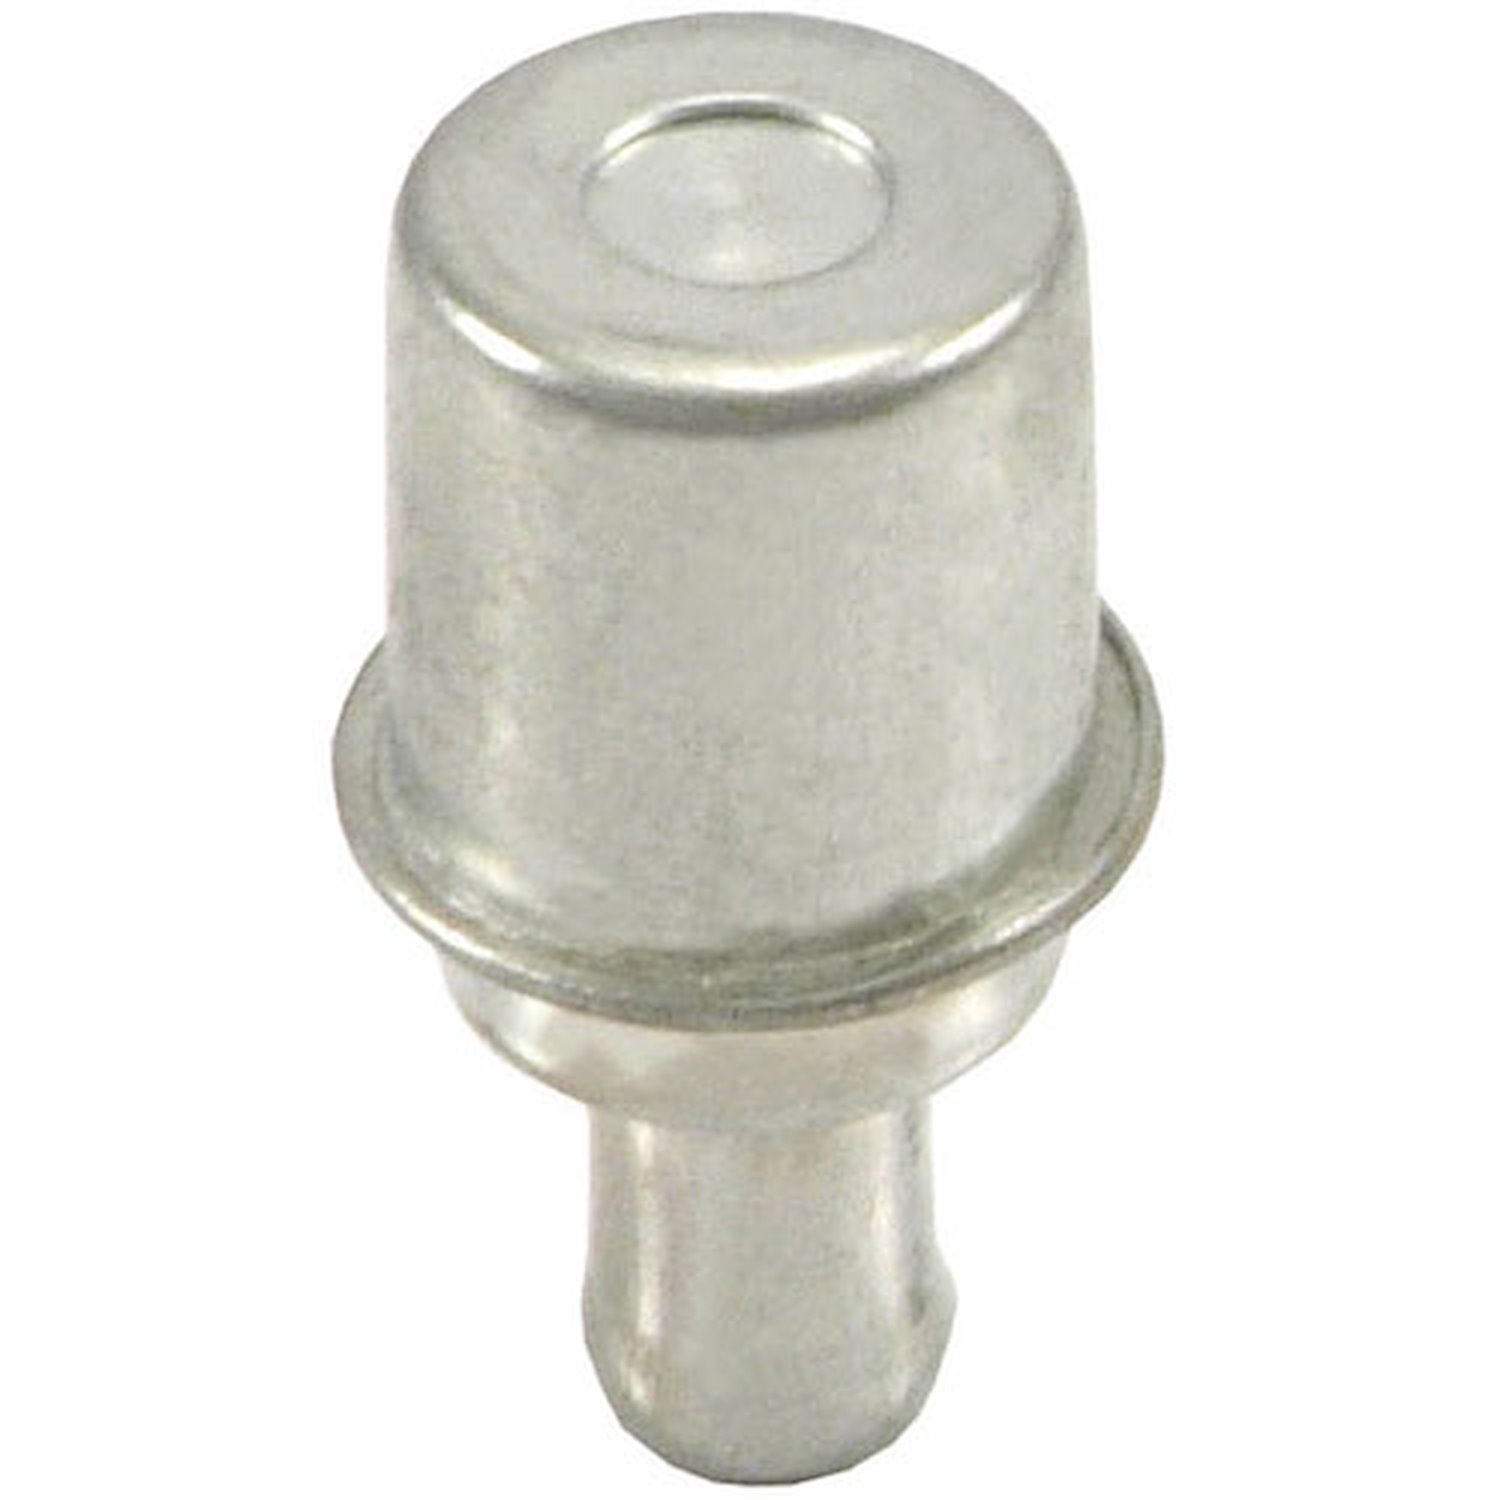 Replacement PCV Valve Zinc Coated Finish